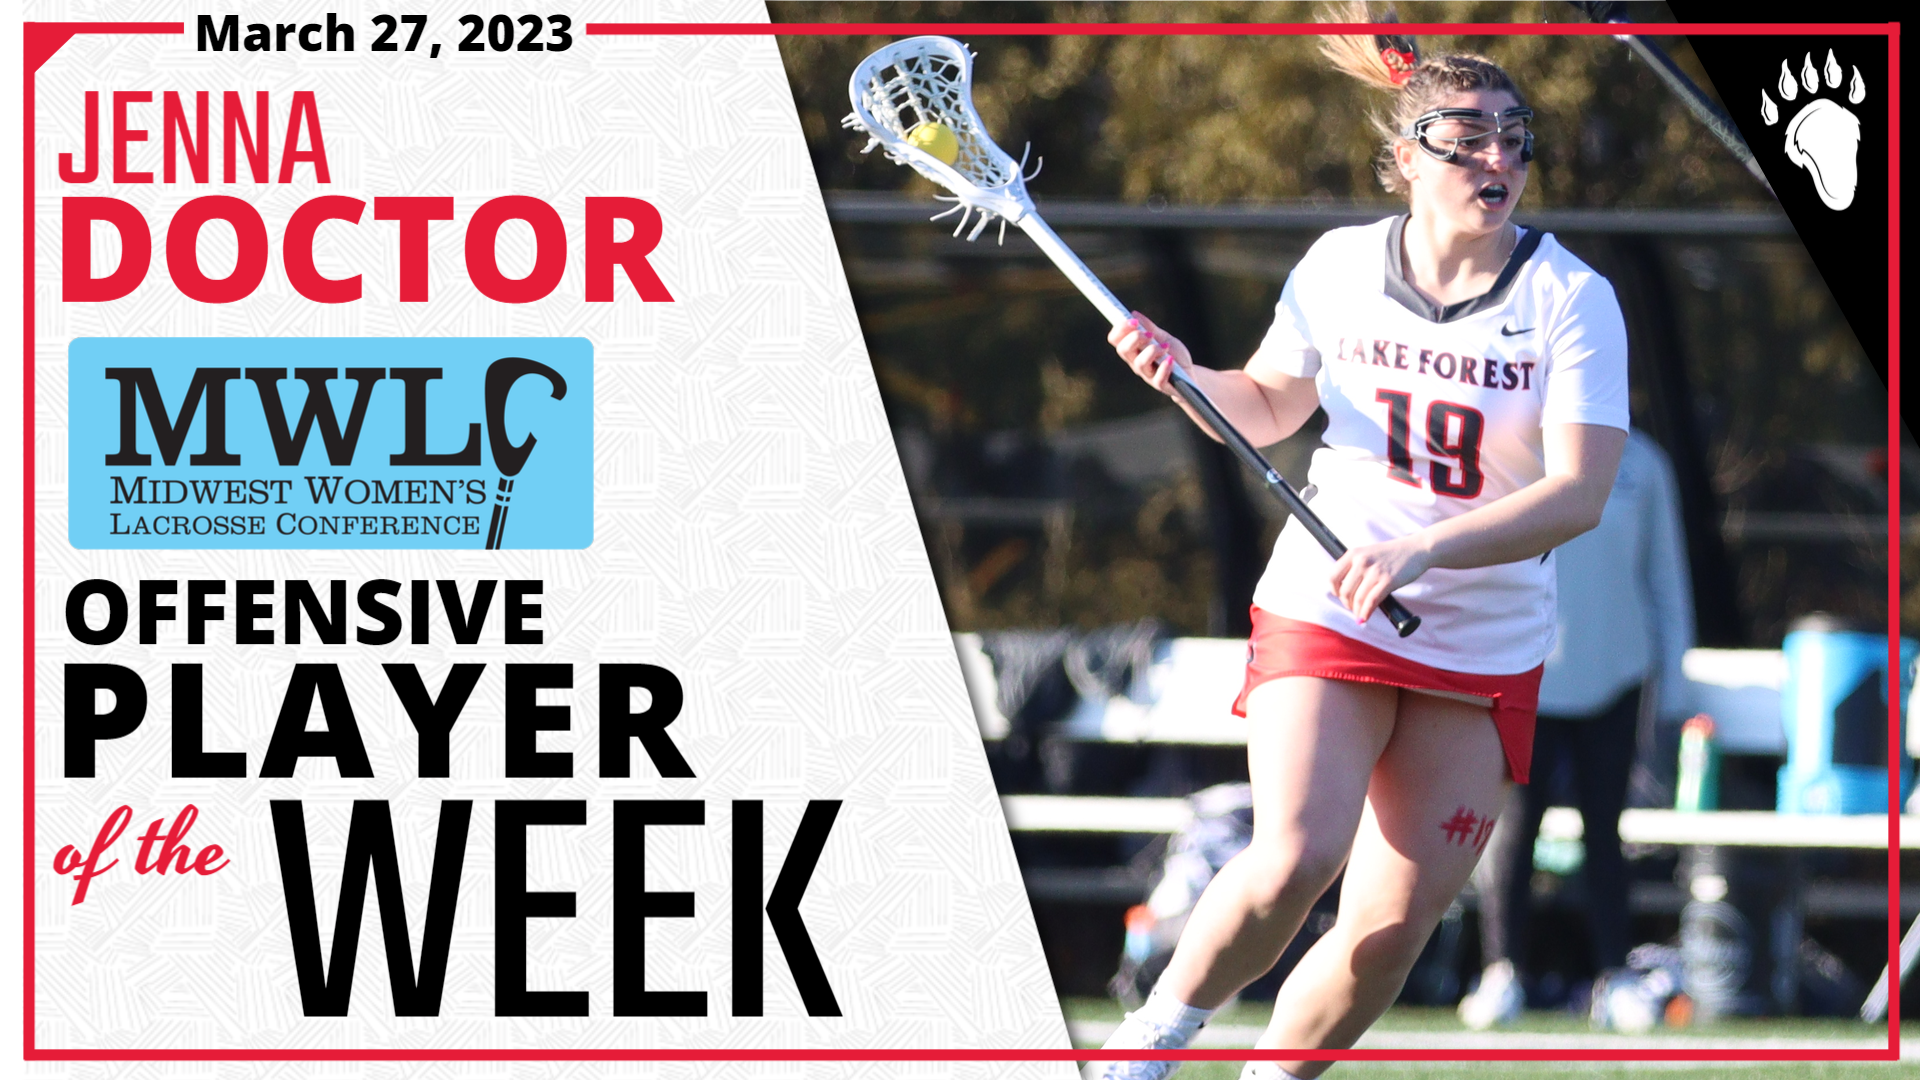 Jenna Doctor Named MWLC Offensive Player of the Week